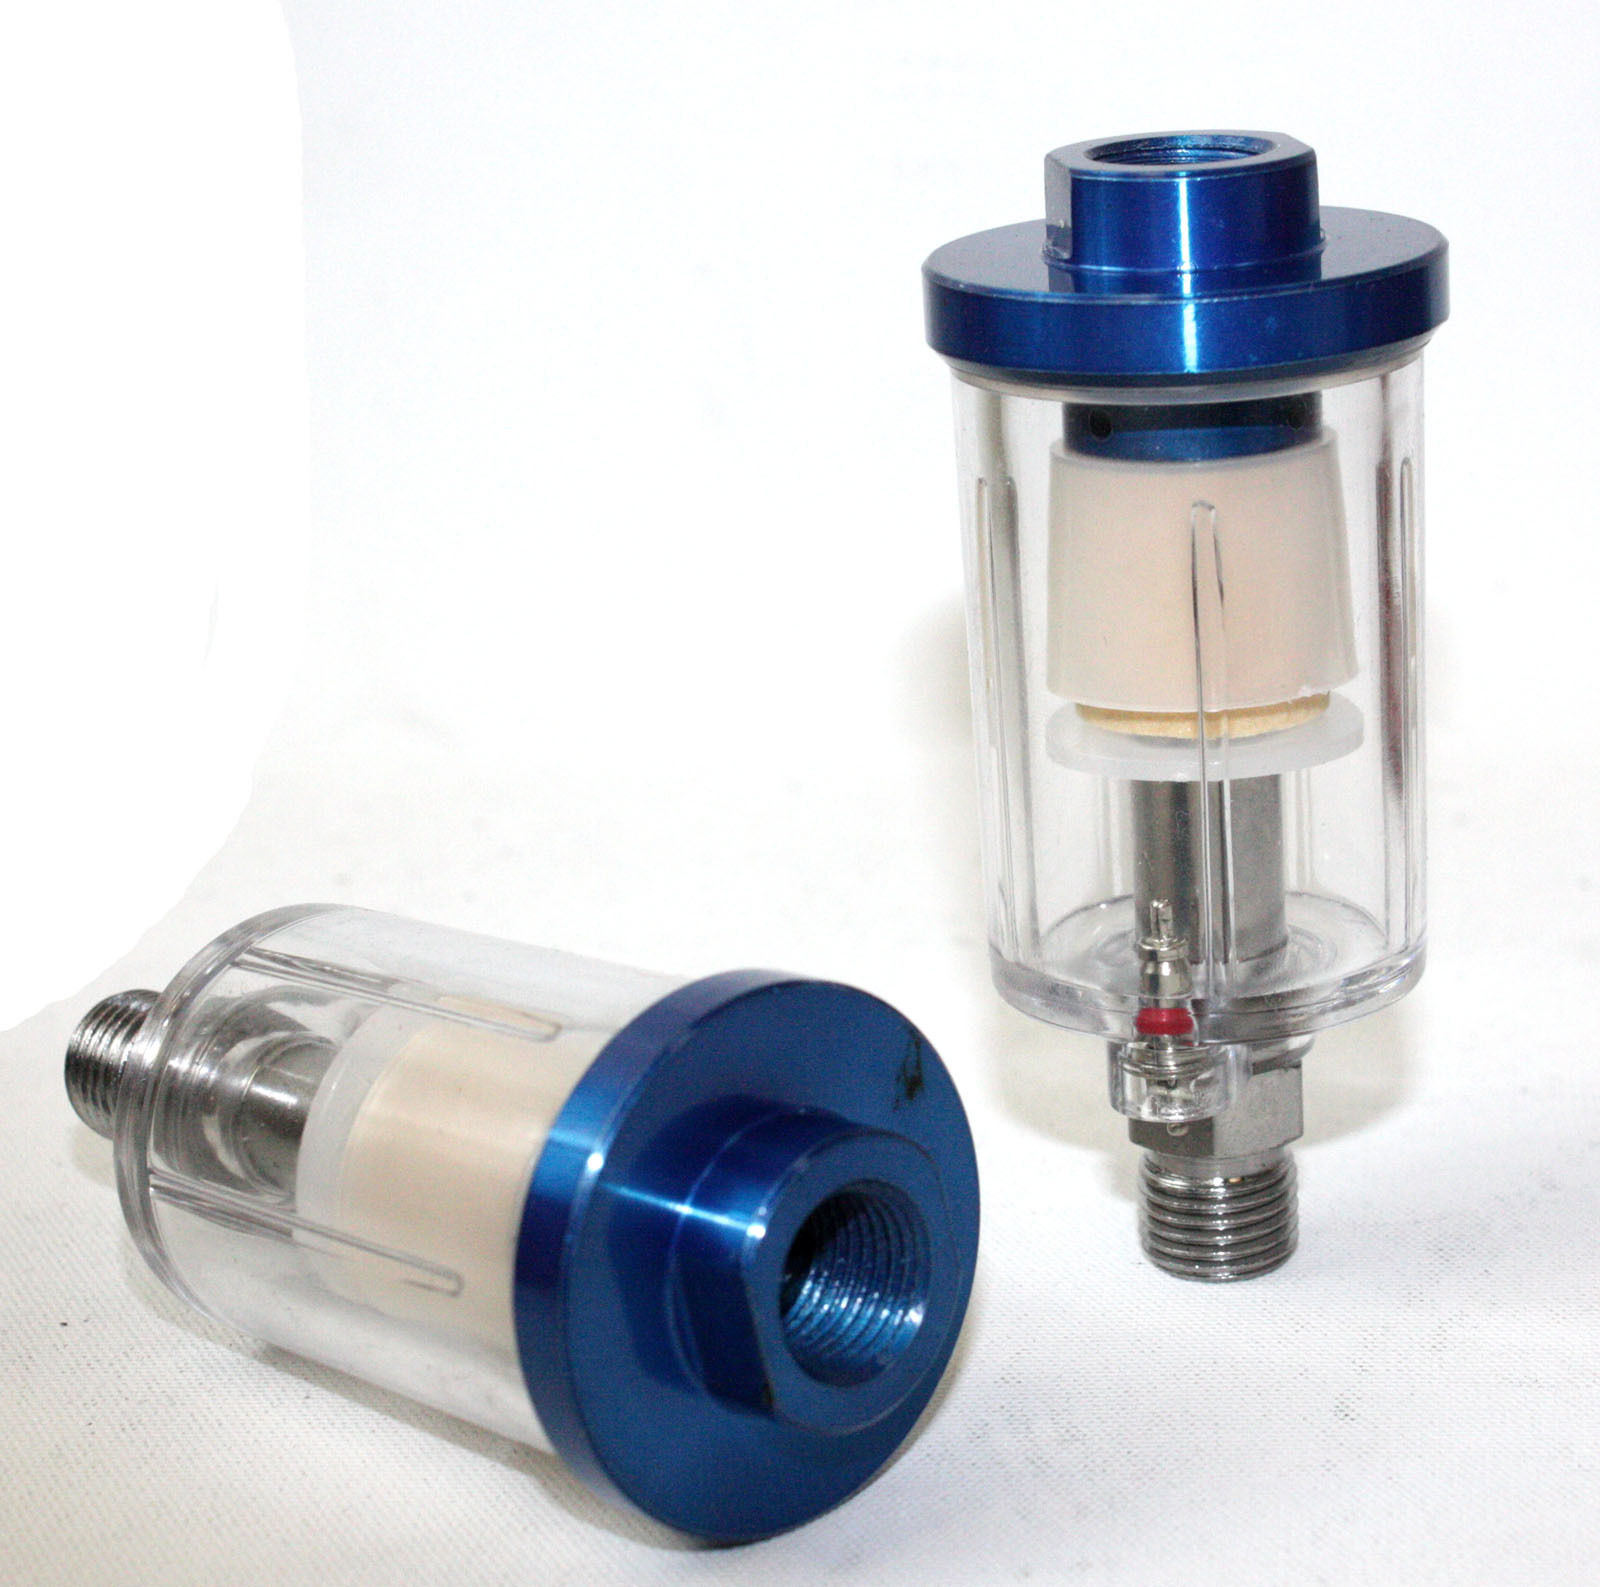 Details about   1/4 Inch NPT Air Filter Pressure Regulator Water/Oil Trap Separator FREE SHIP 